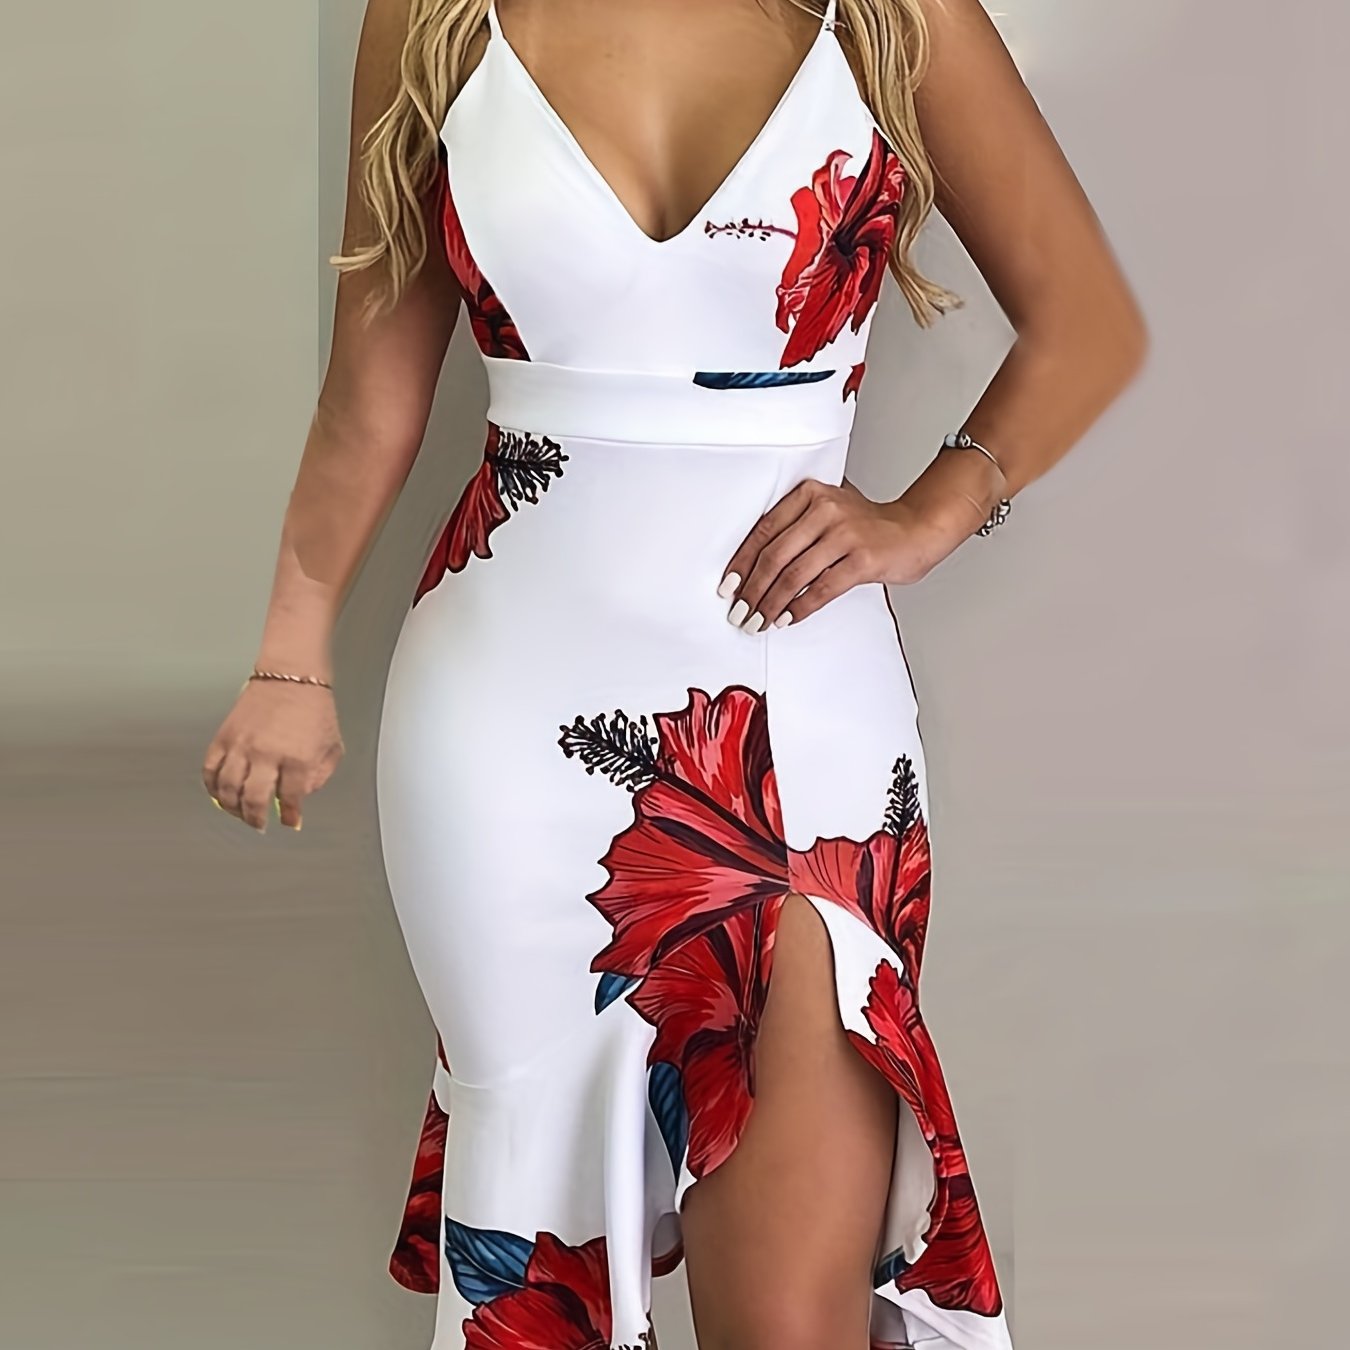 Spring/Summer Chic Floral Bodycon Dress - Sexy V Neck with Asymmetrical Ruffle Hem, Durable Stretch Knit Fabric & Spaghetti Straps